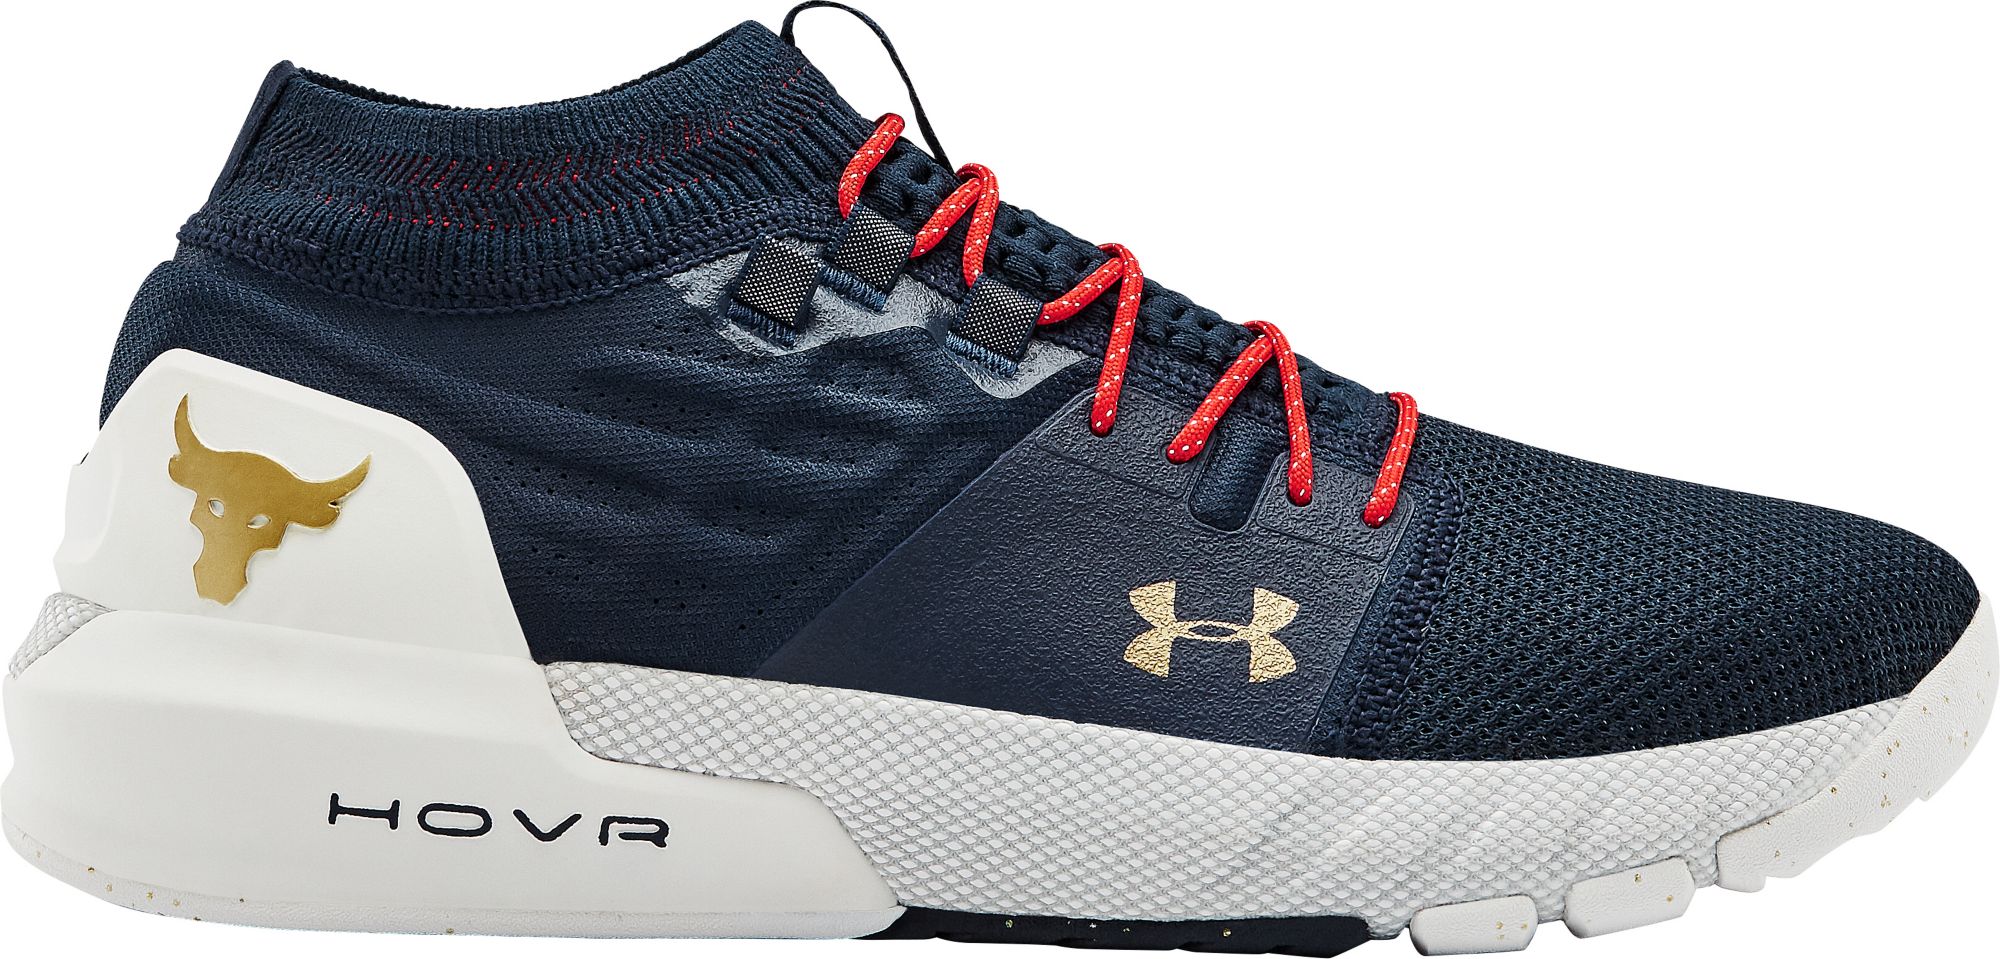 under armor workout shoes